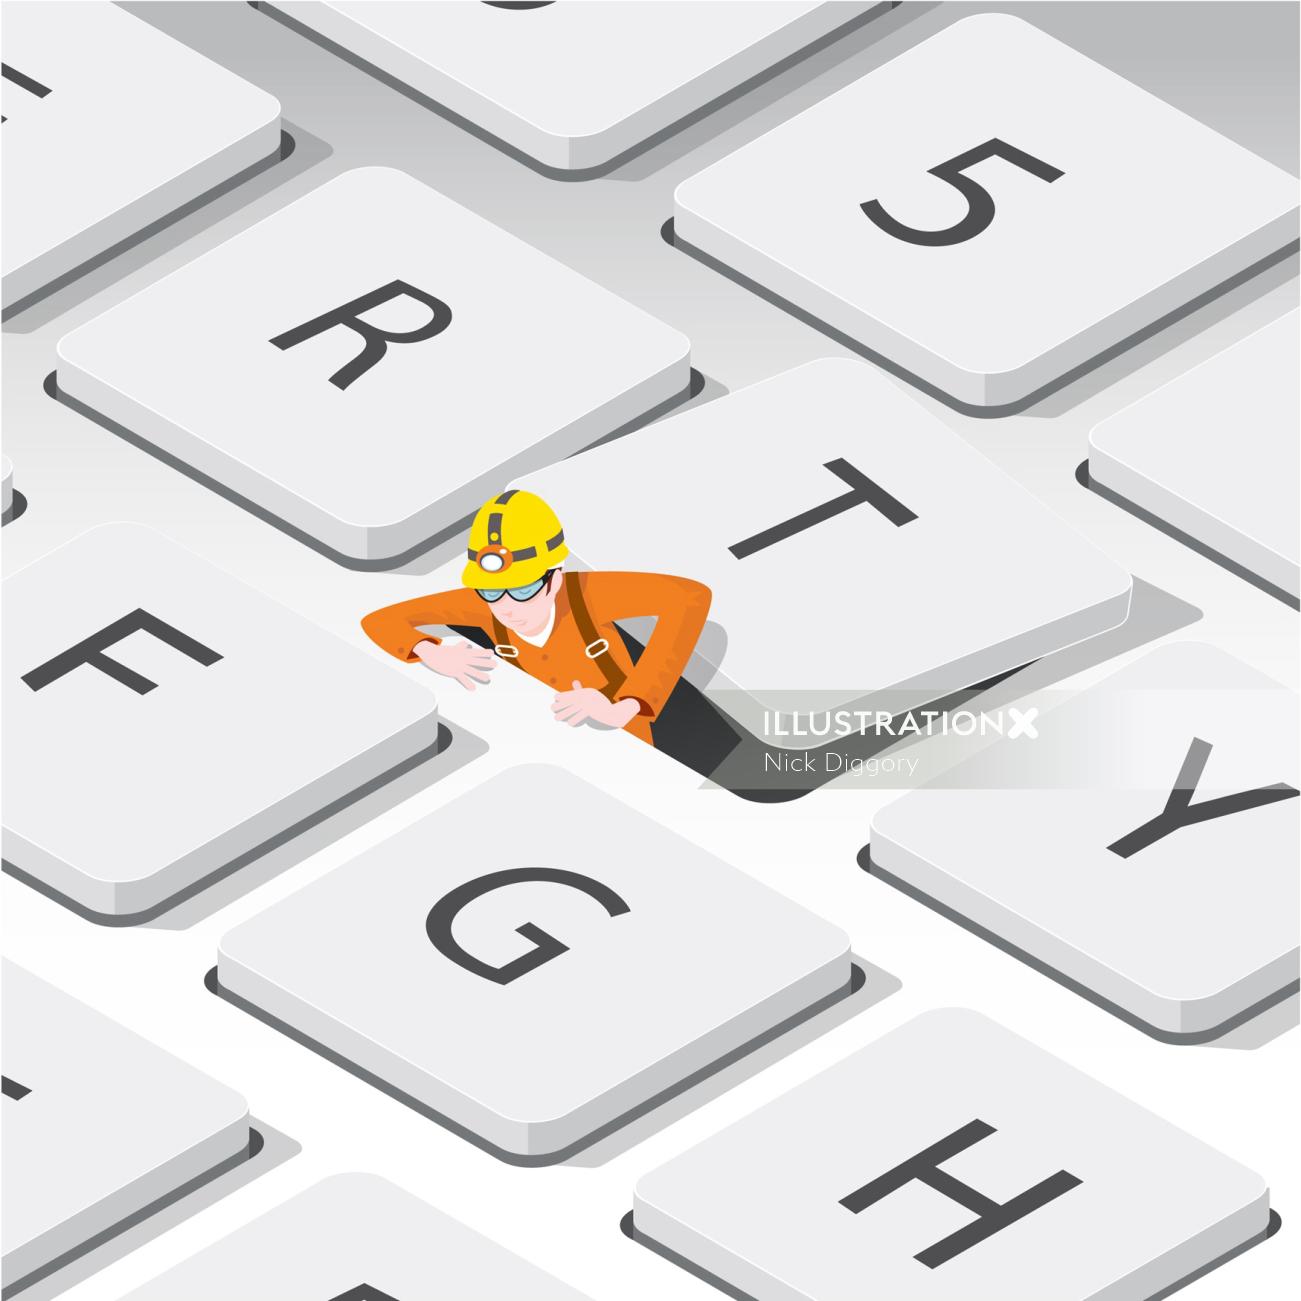 Digital Illustration of man coming out of keyboard
